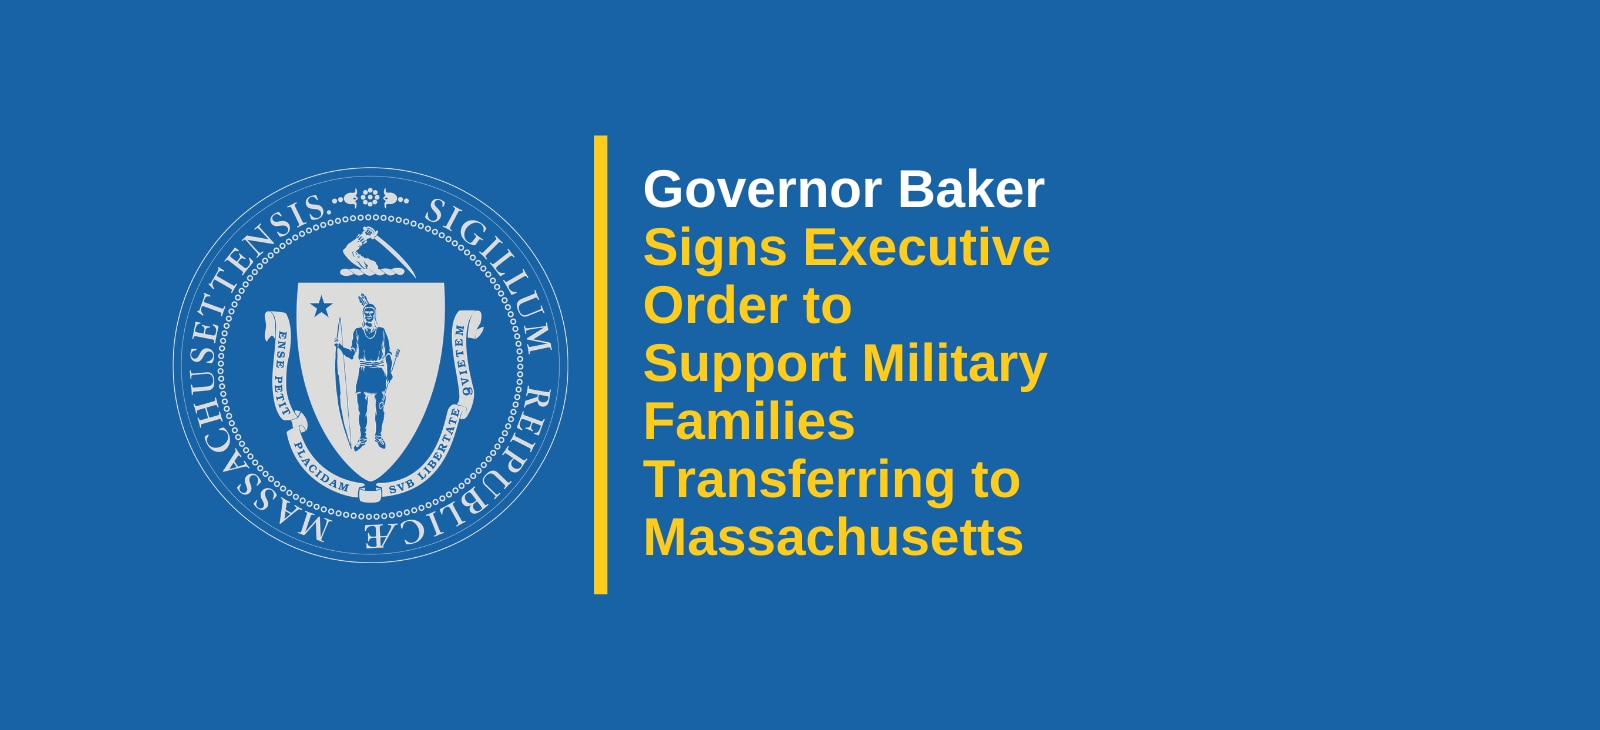 Governor Baker Signs Executive Order to Support Military Families Transferring to Massachusetts